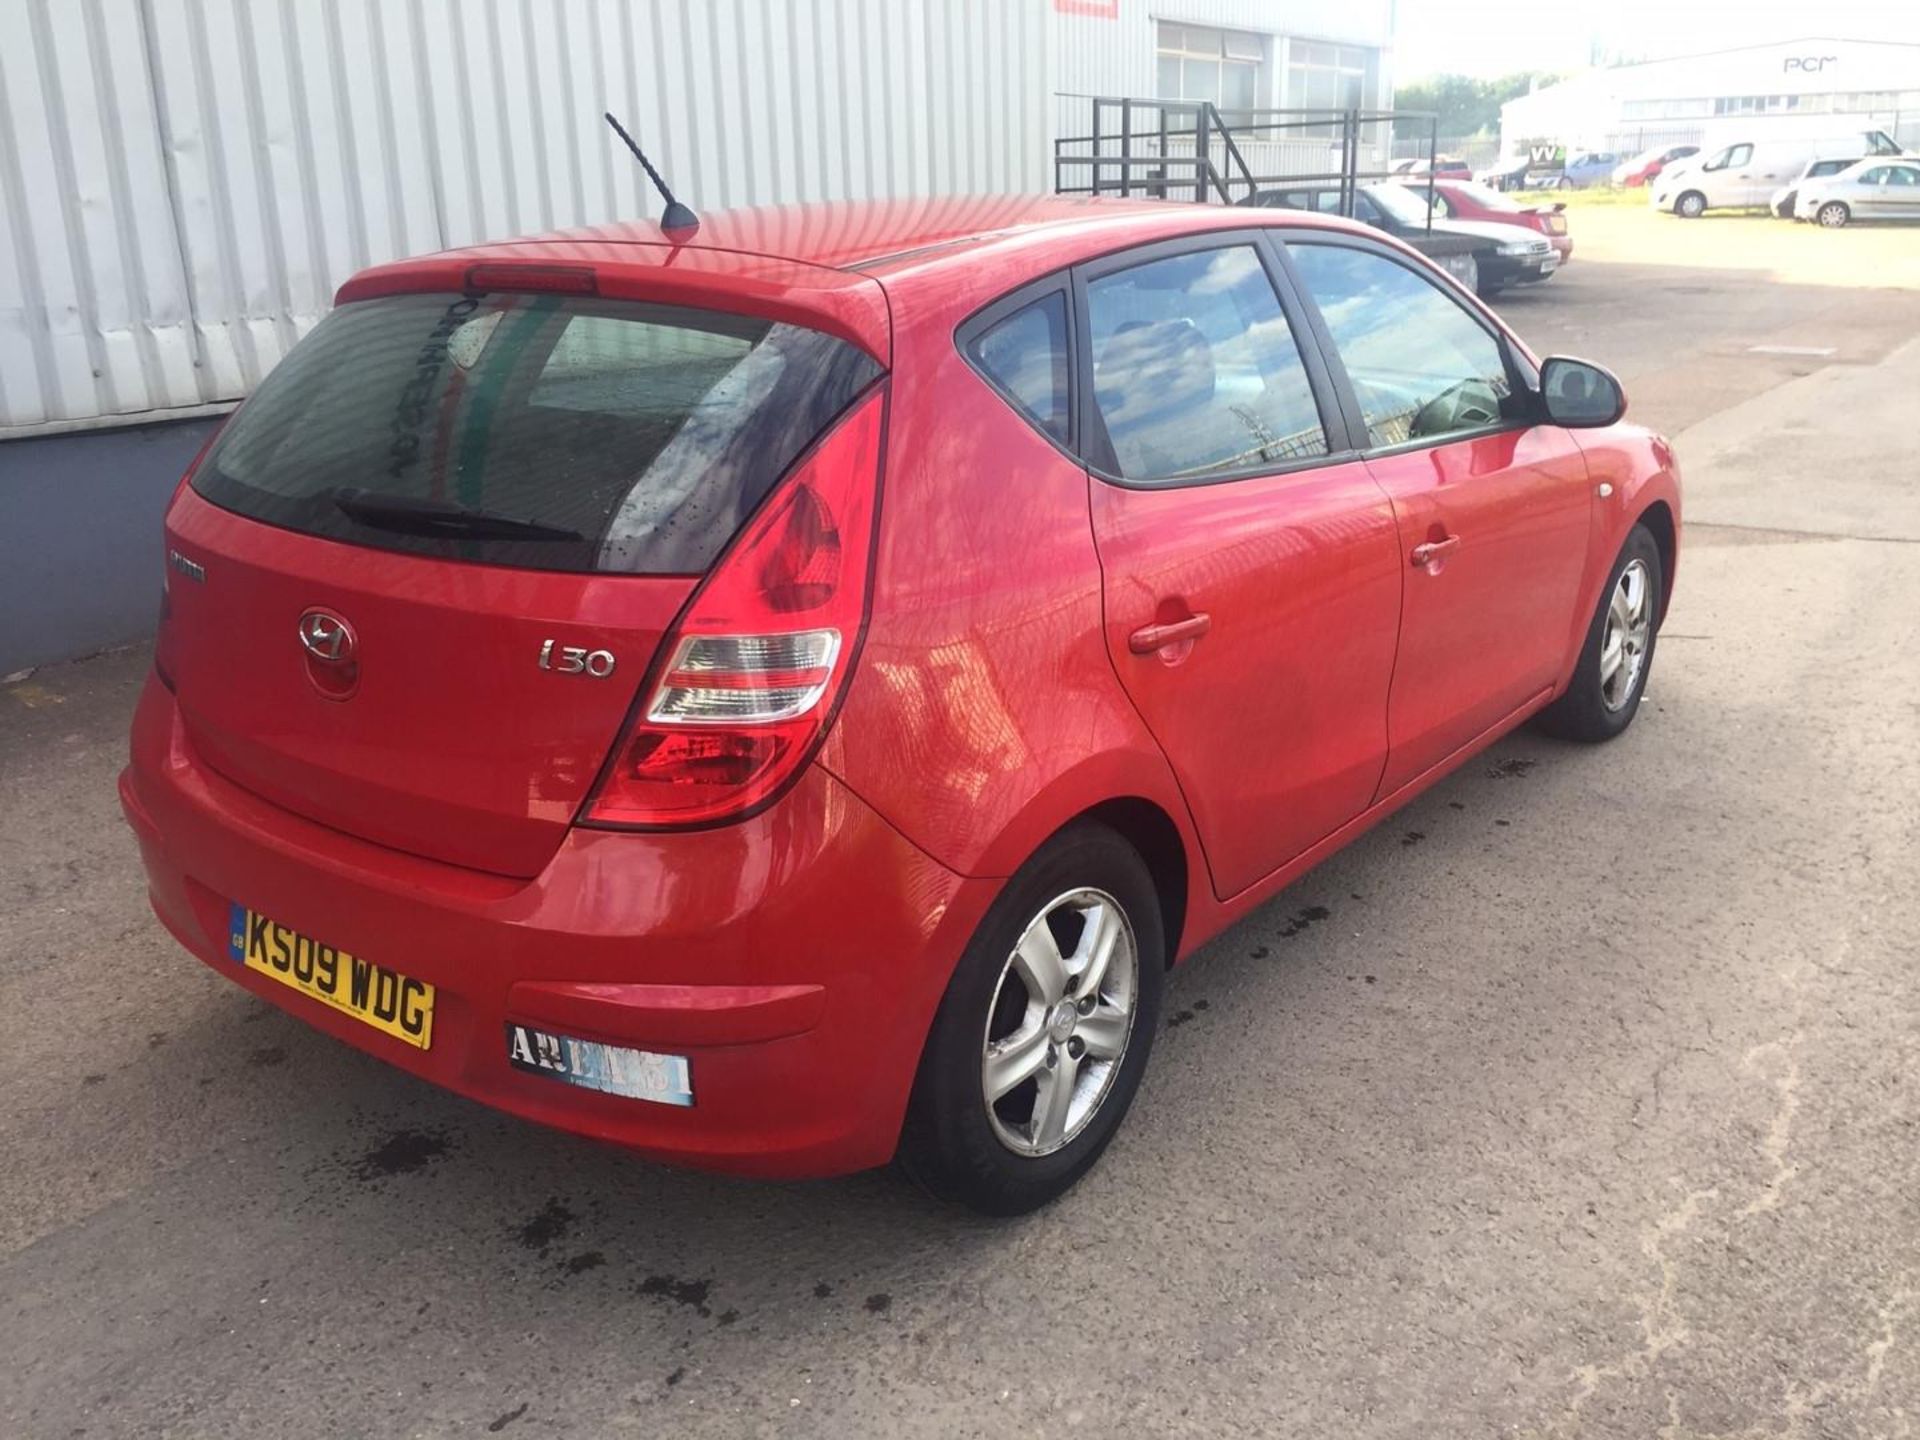 2009 Hyundai i30 Comfort 1.6 Petrol - CL505 - NO VAT ON THE HAMMER - Location: Corby - Image 3 of 11